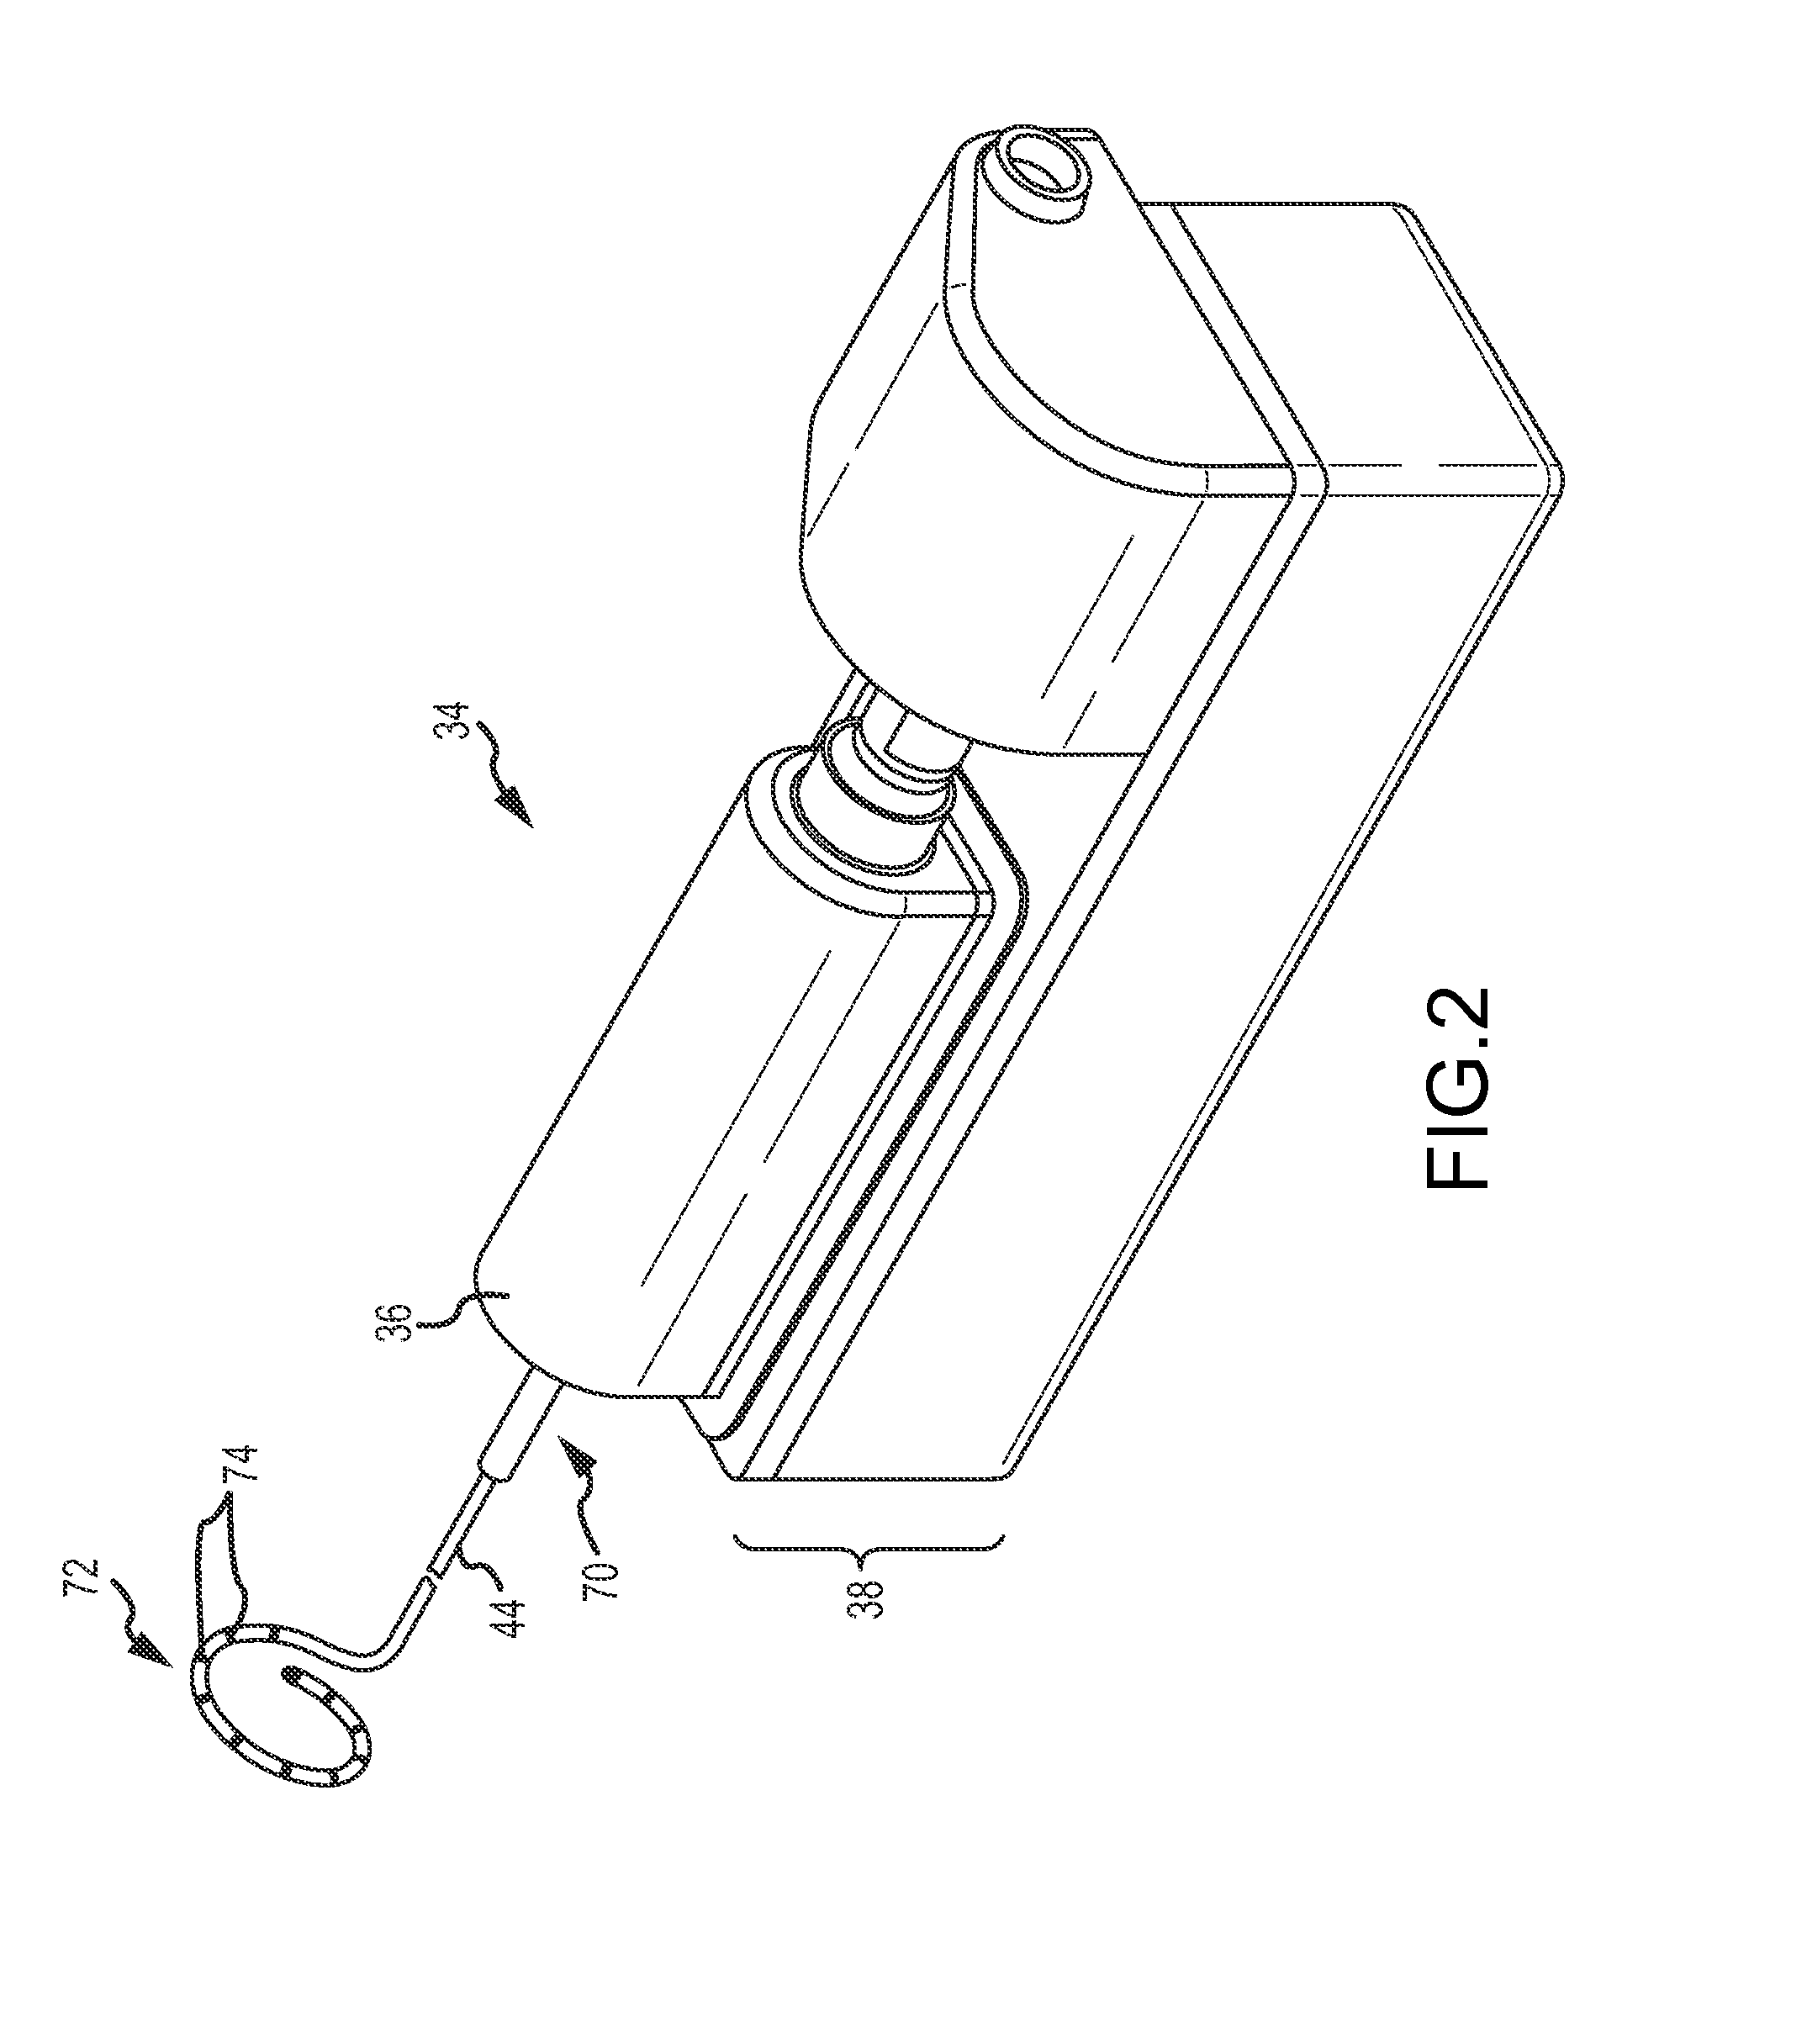 Drive assembly for use in a robotic control and guidance system